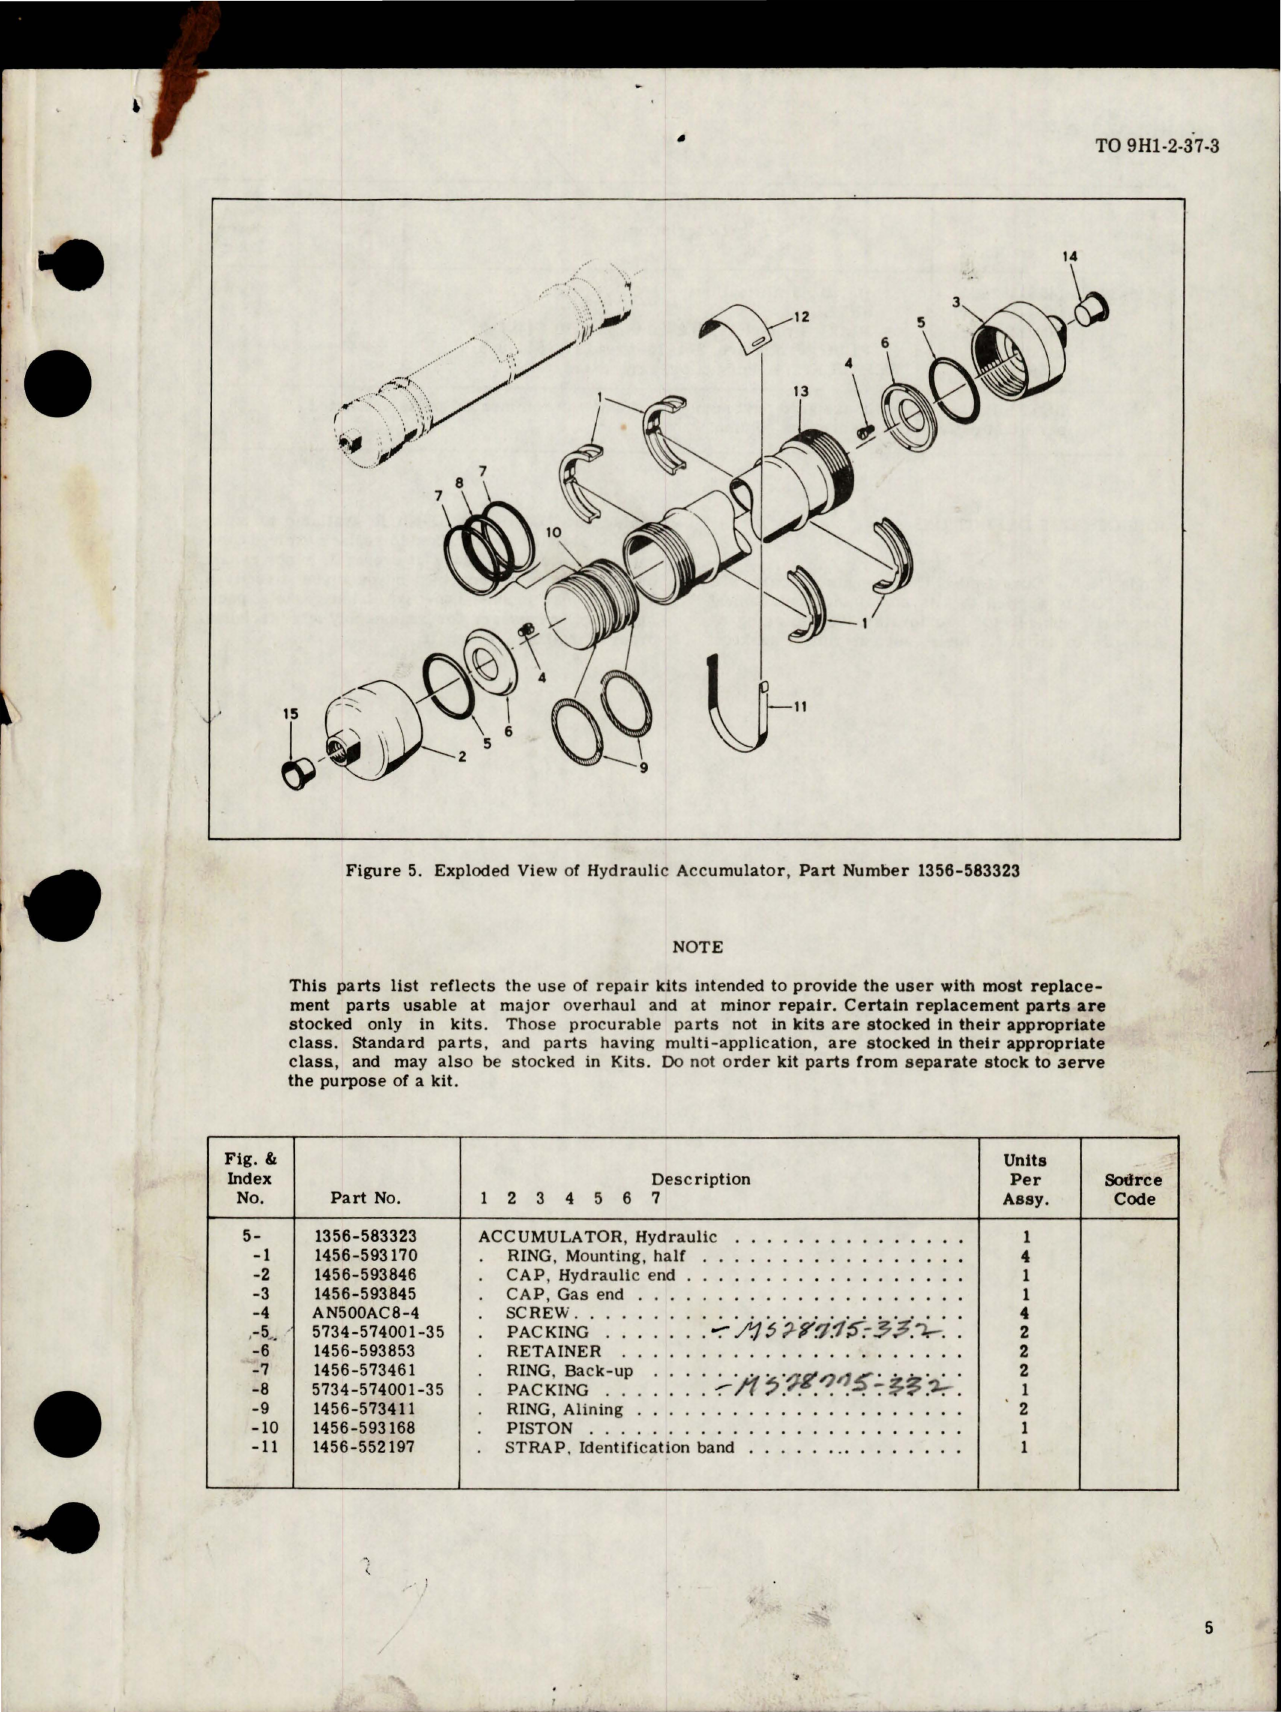 Sample page 5 from AirCorps Library document: Overhaul Instructions with Parts Breakdown for Hydraulic Accumulator - Part 1356-583323 